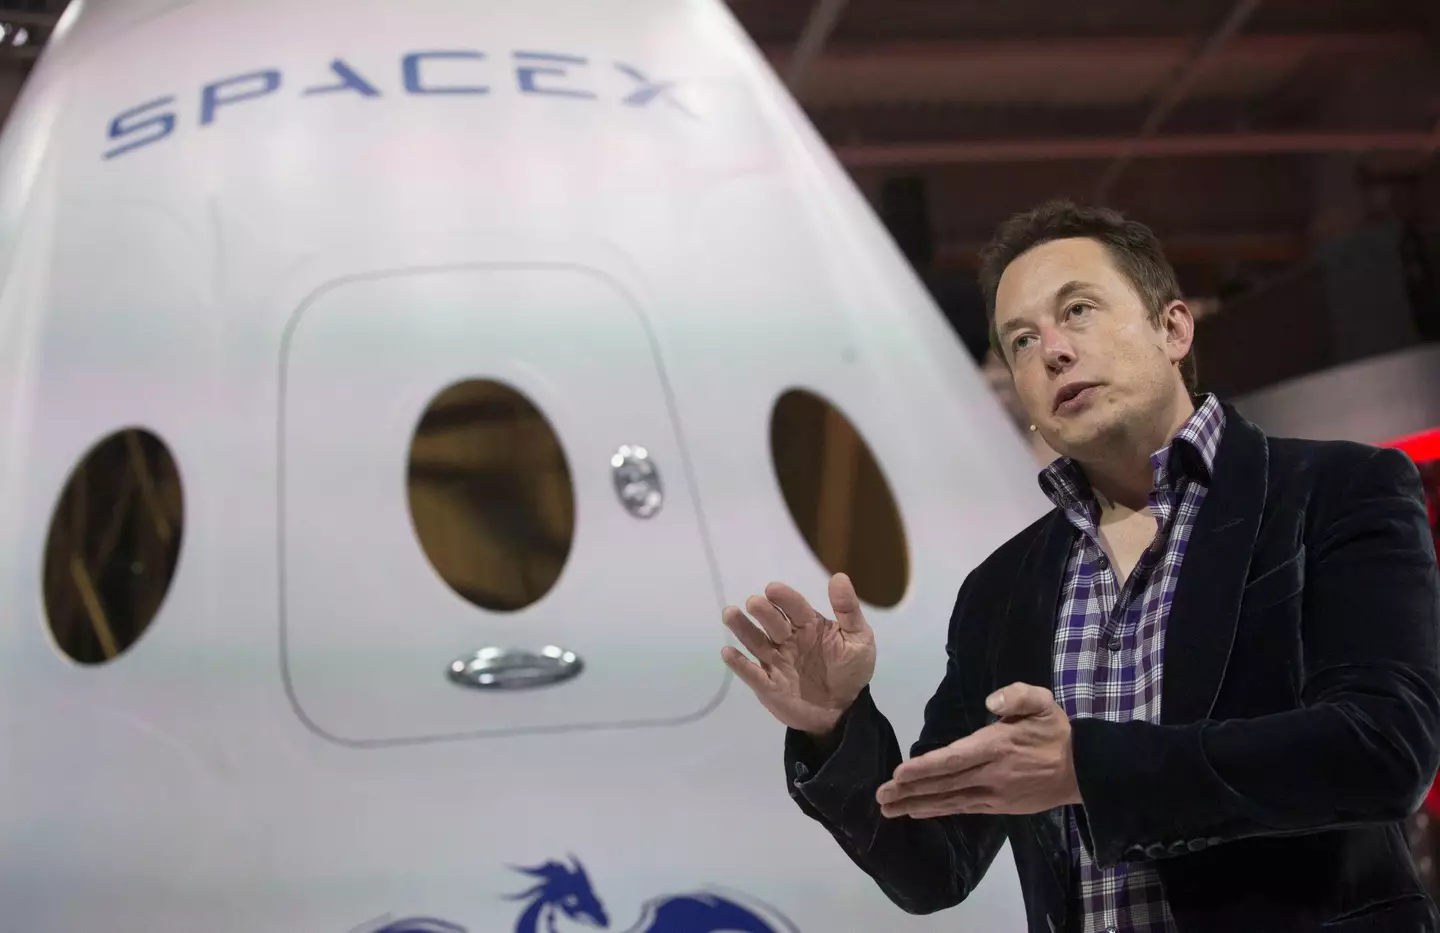 Elon Musk in front of a SpaceX shuttle.